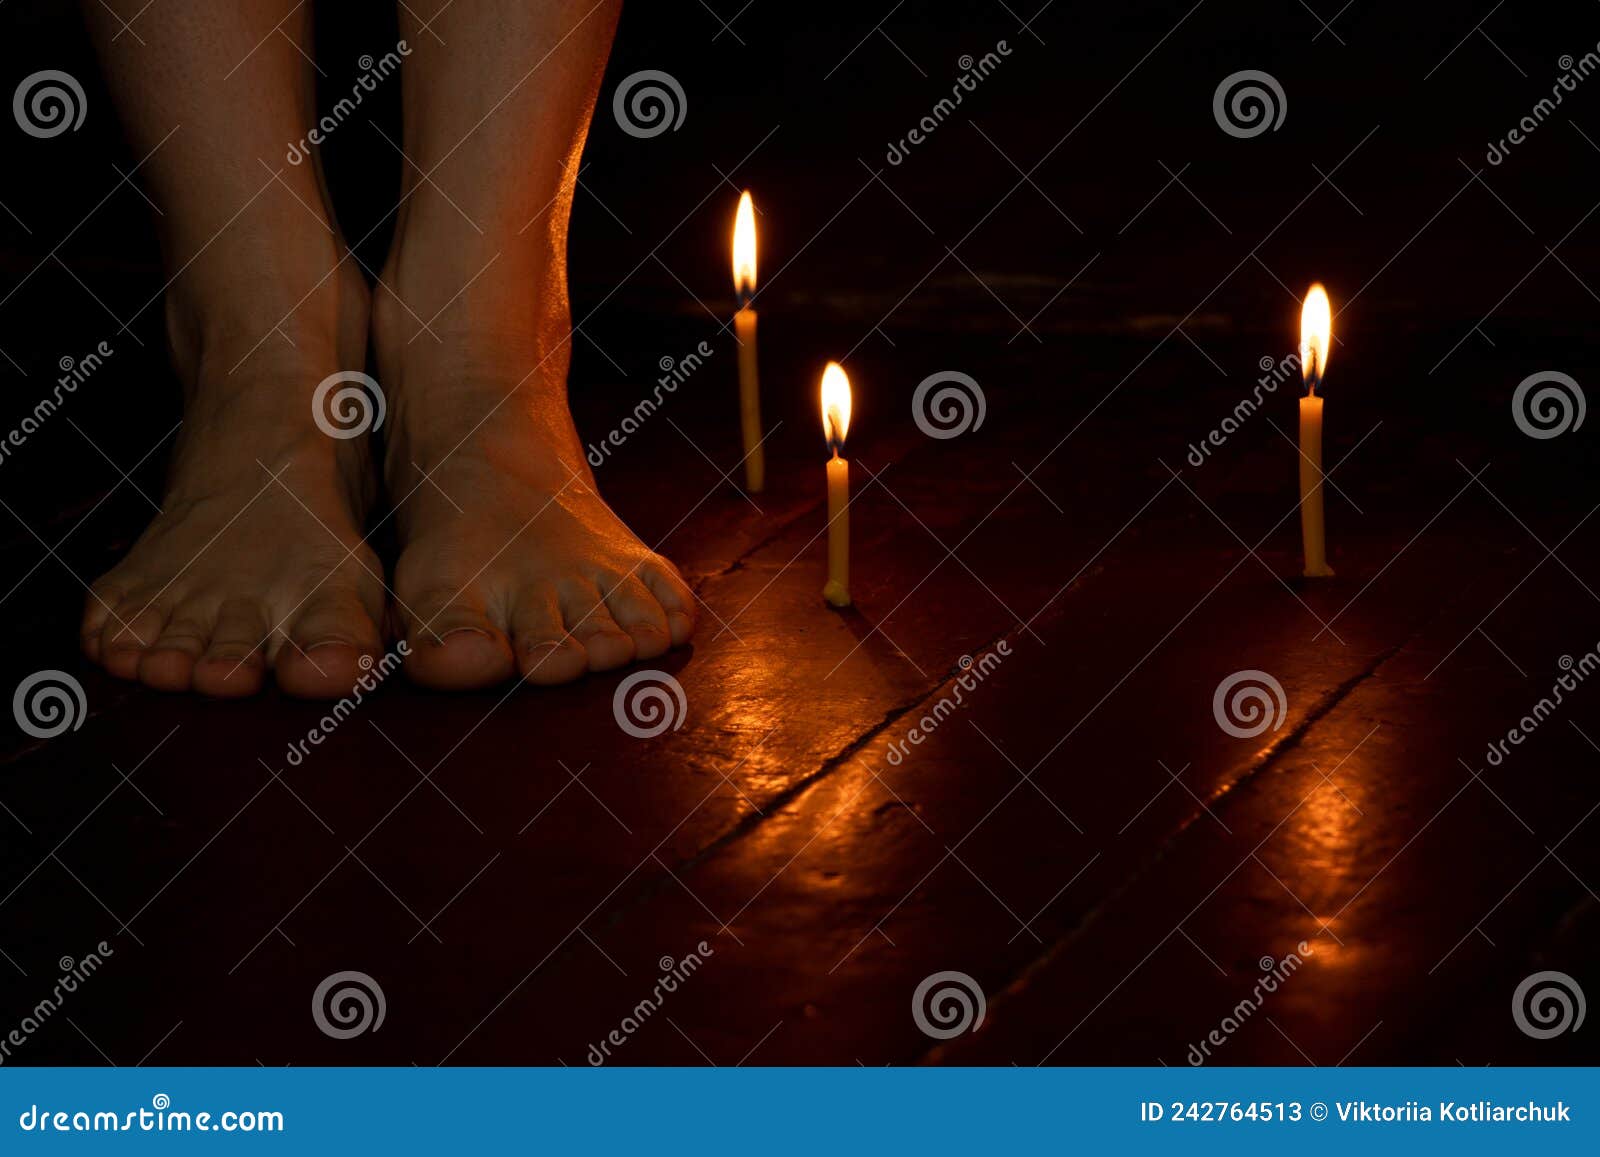 bare female feet on the floor at home in the dark near candles, female feet